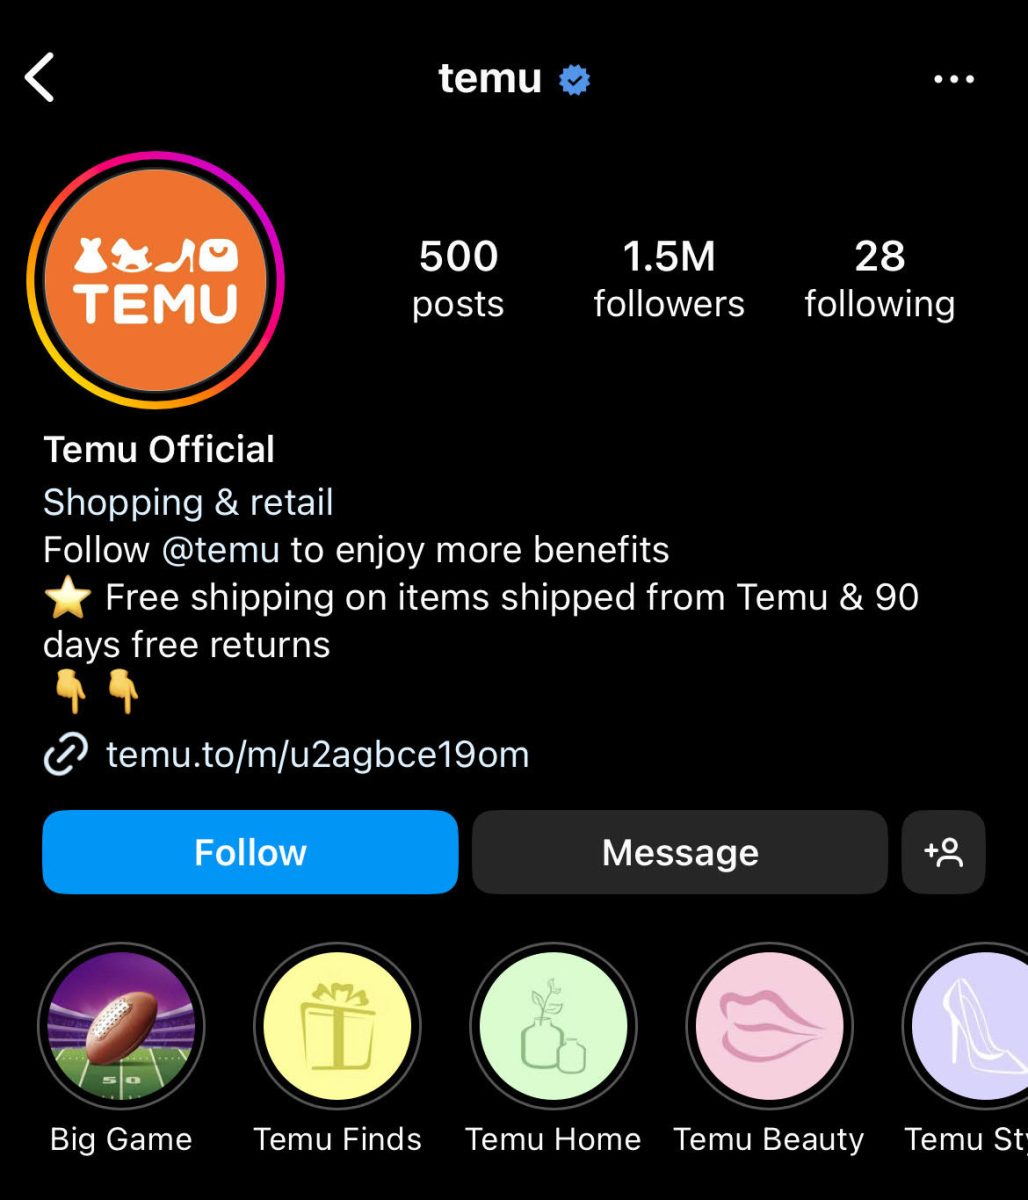 Temu advertises their free shipping and 90 day free return policies. Screenshot from: @temu on Instagram
